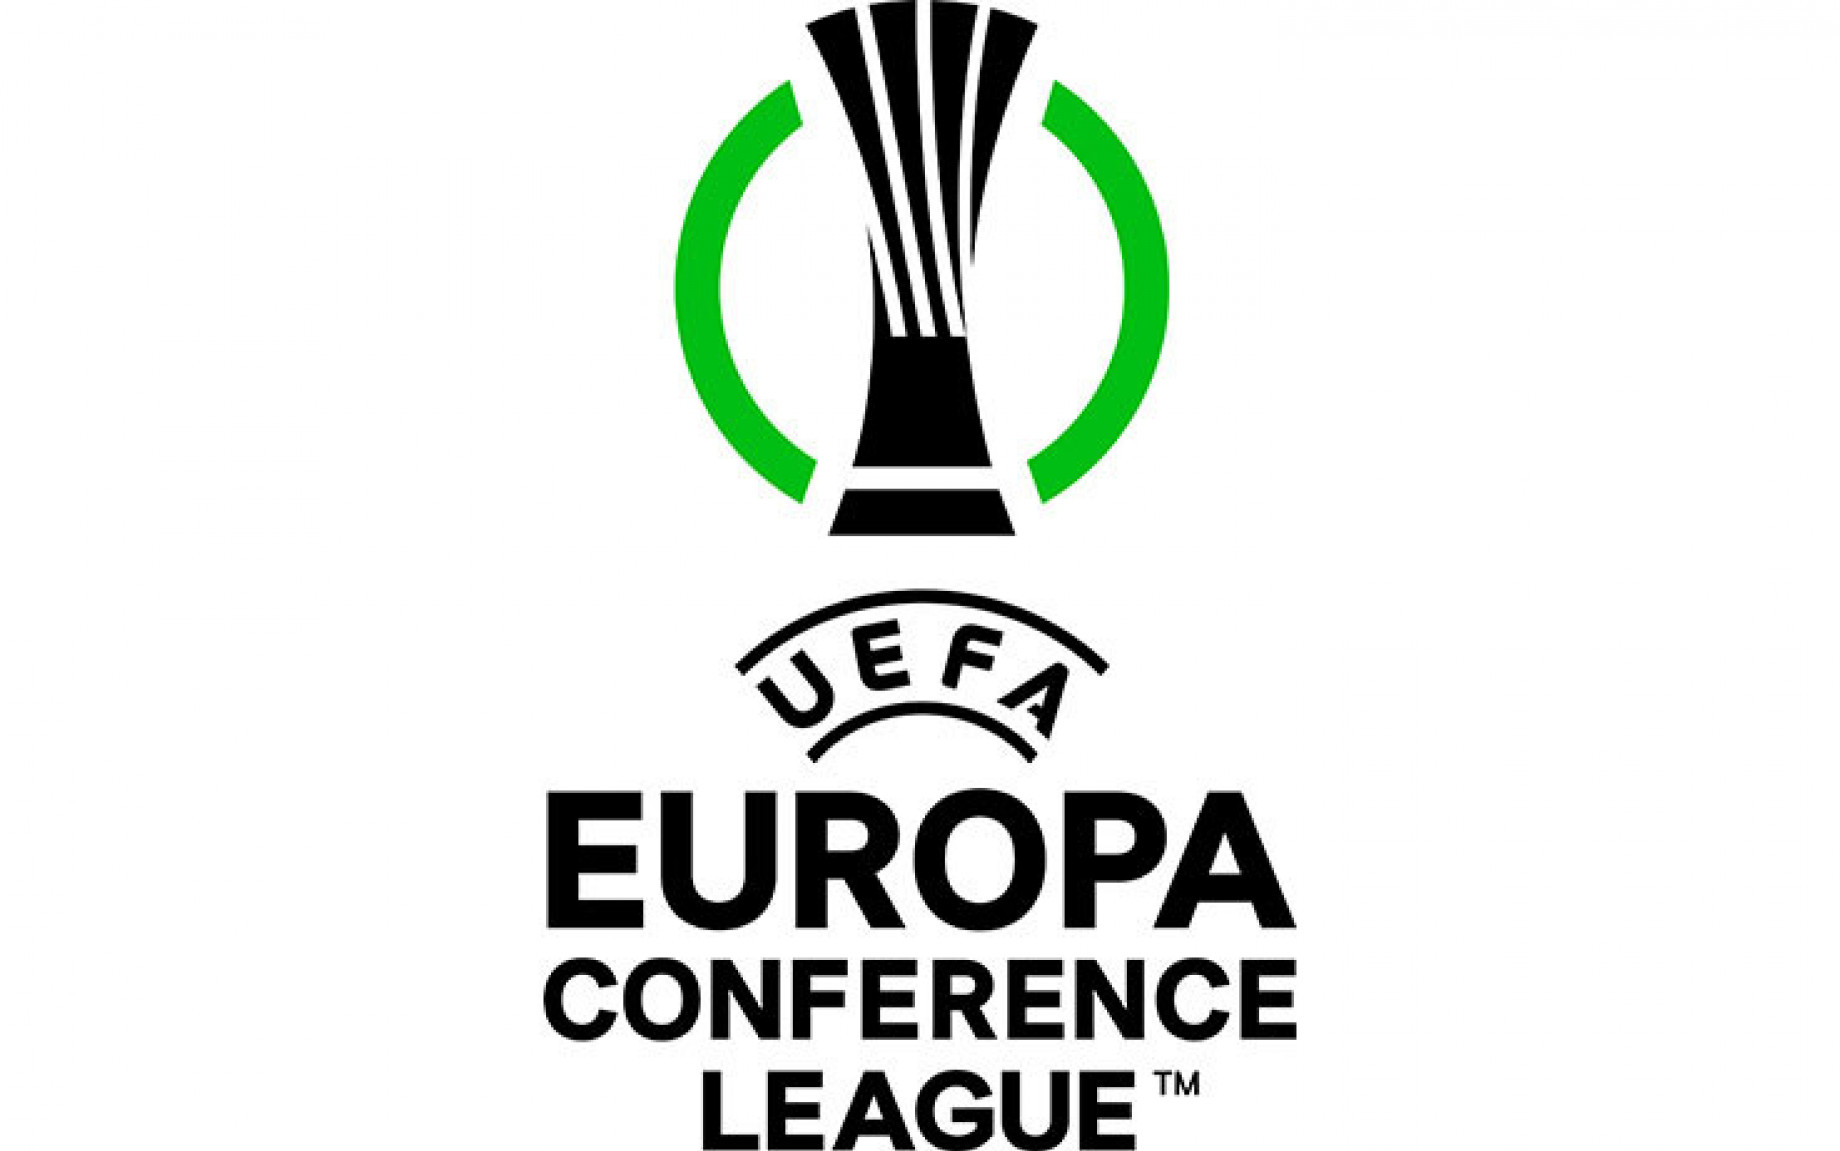 conference_league_logo_gallery.jpg